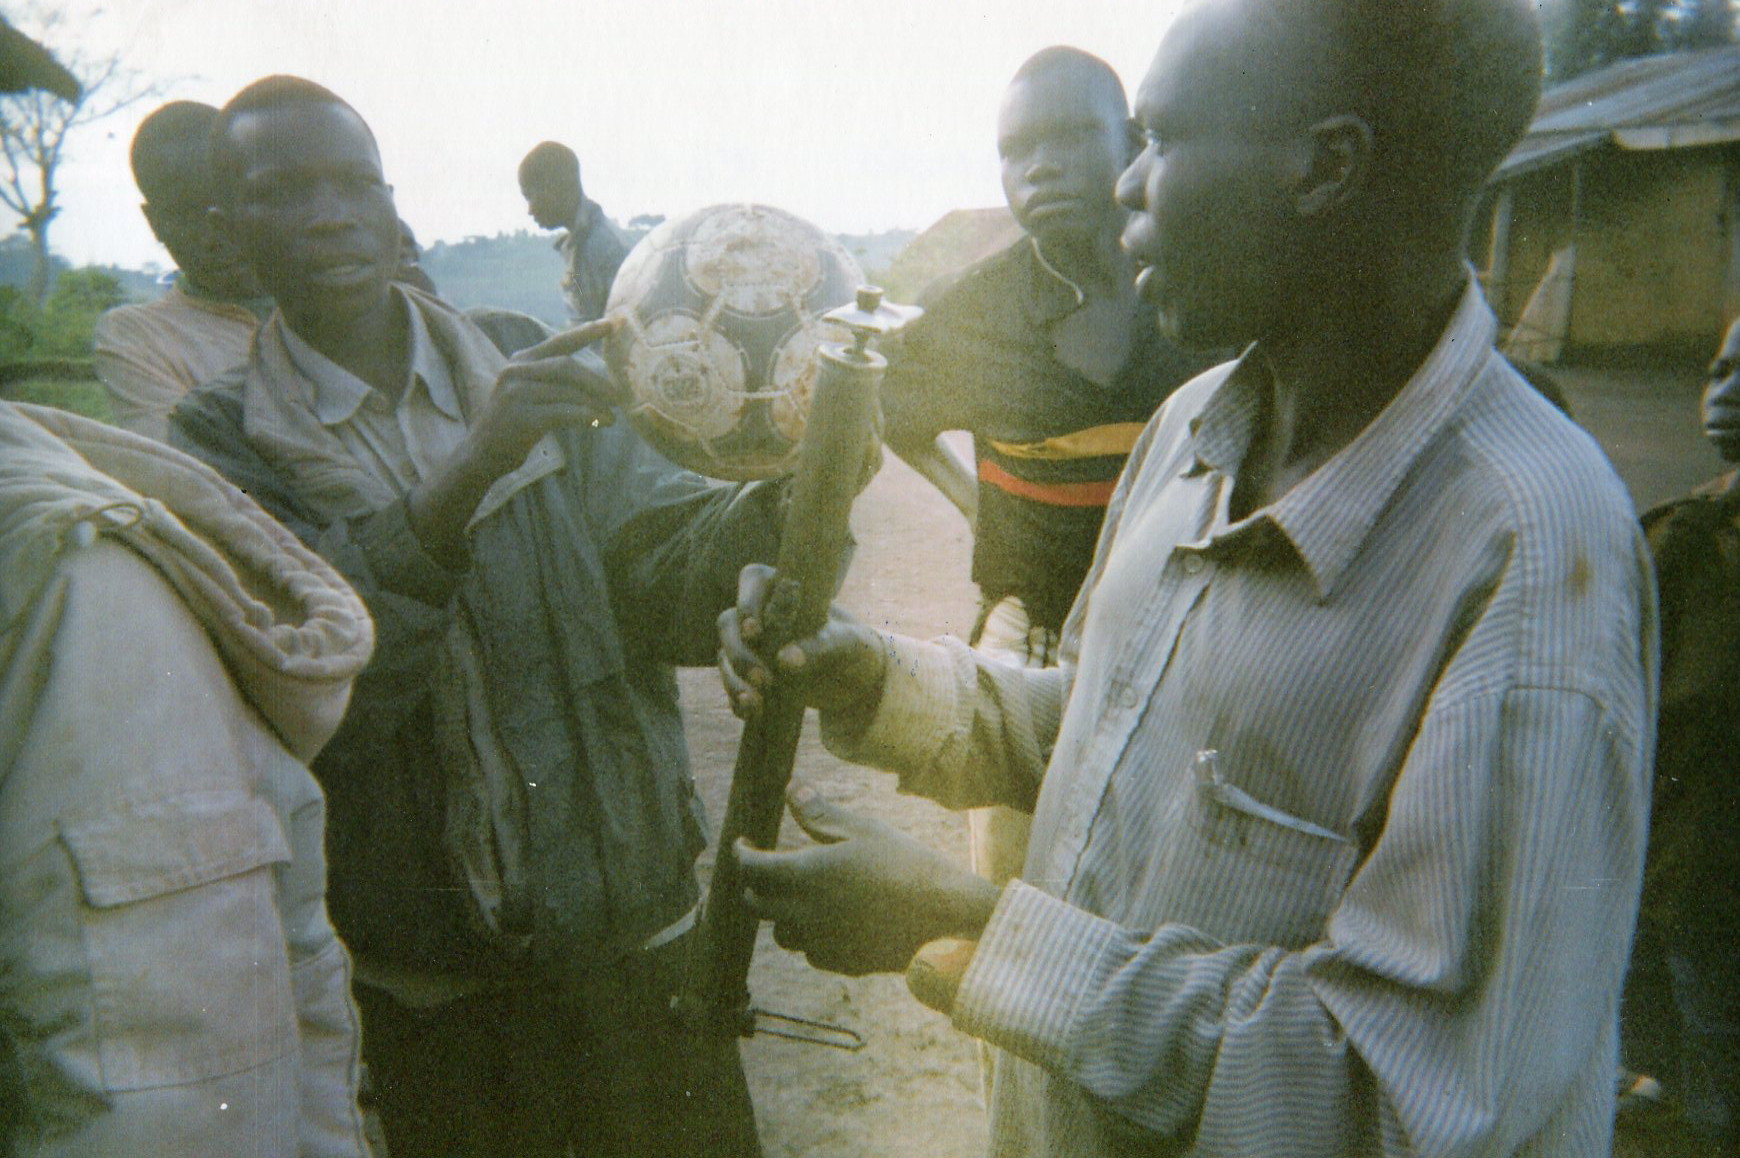  The child is accepted well in the community and plays football with others. 